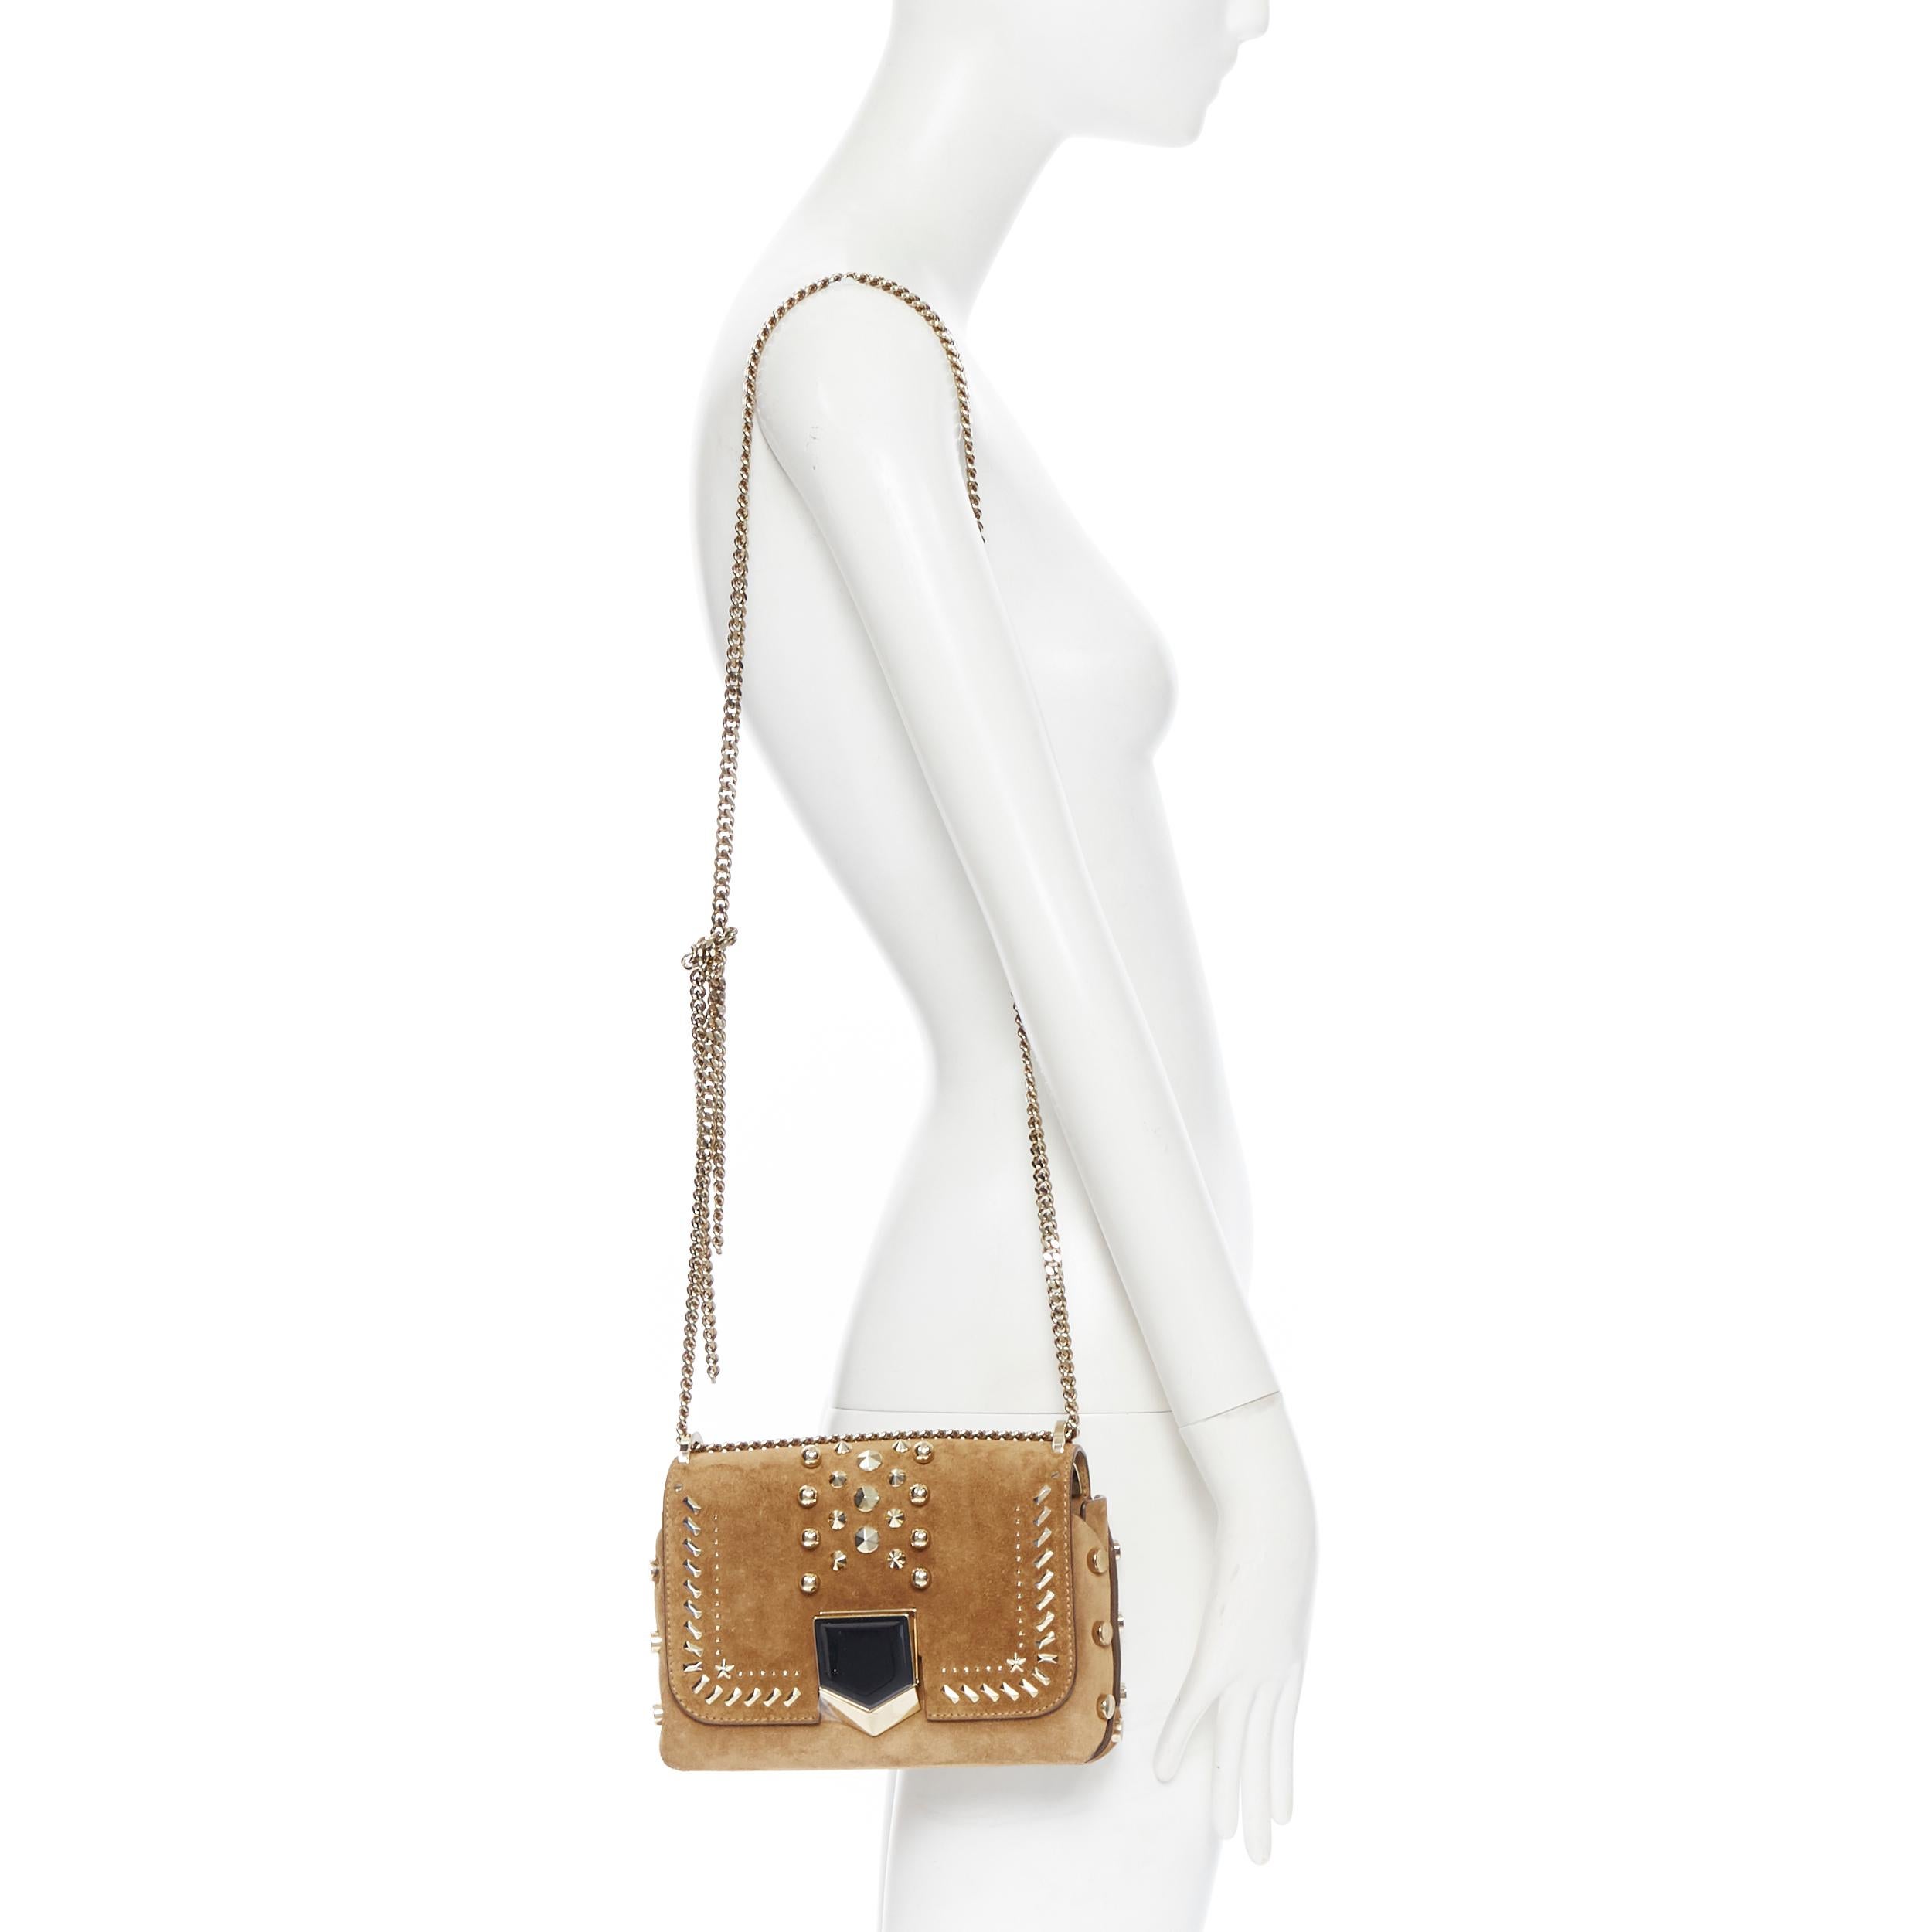 new JIMMY CHOO Lockett Petite brown suede gold studded push lock shoulder bag
Brand: Jimmy Choo
Model Name / Style: Lockett
Material: Leather
Color: Brown
Pattern: Solid
Closure: Clasp
Extra Detail: Tan brown suede leather Jimmy Choo Petite Lockett